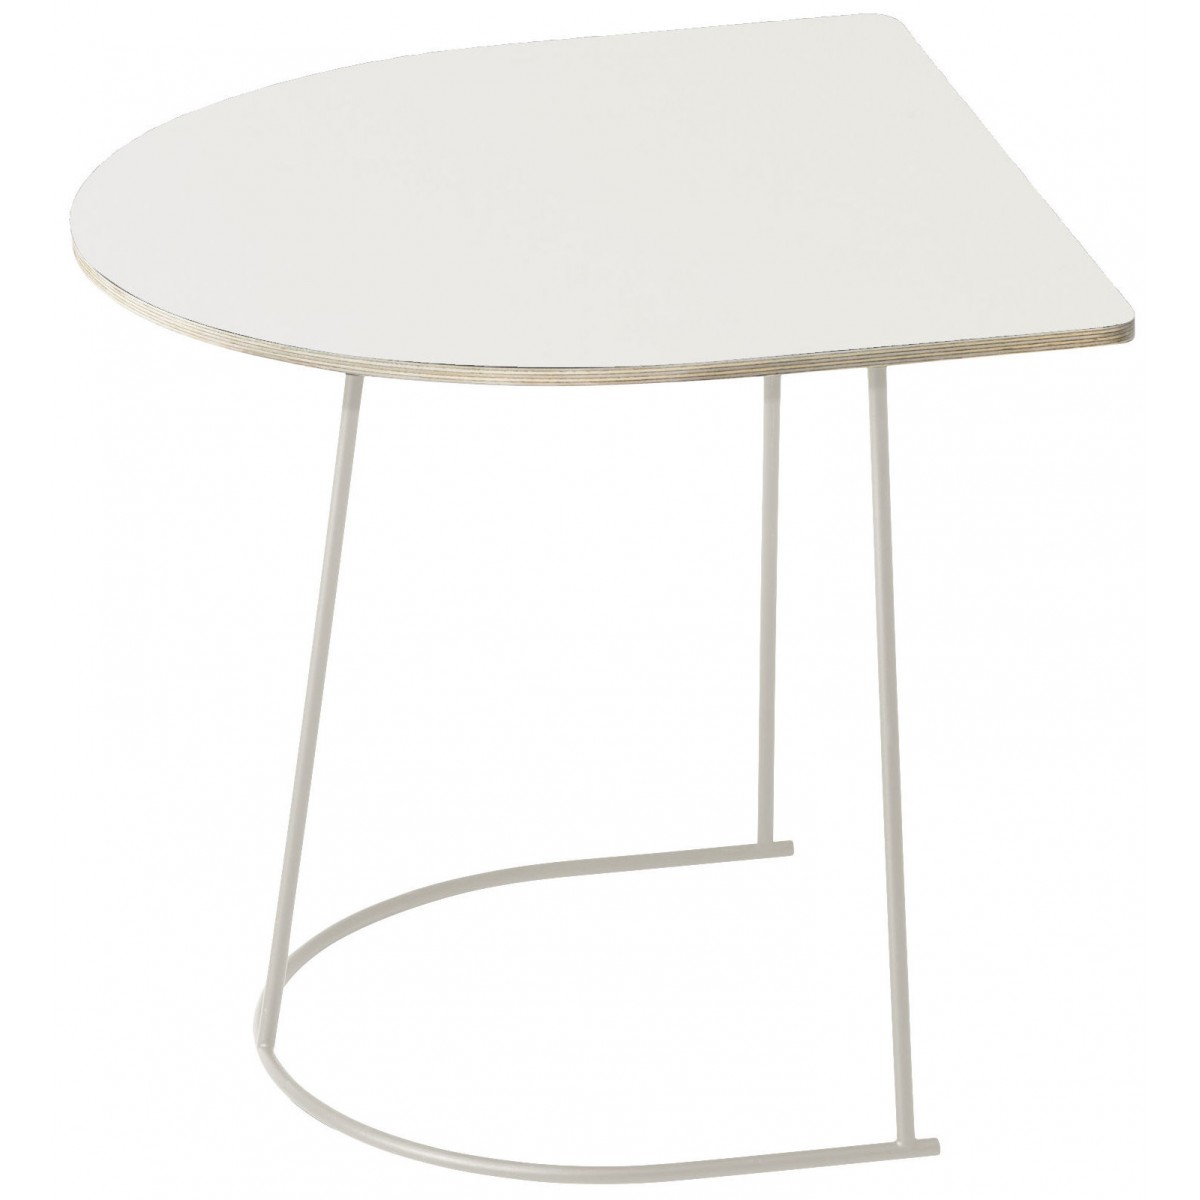 half size - off-white - Airy table